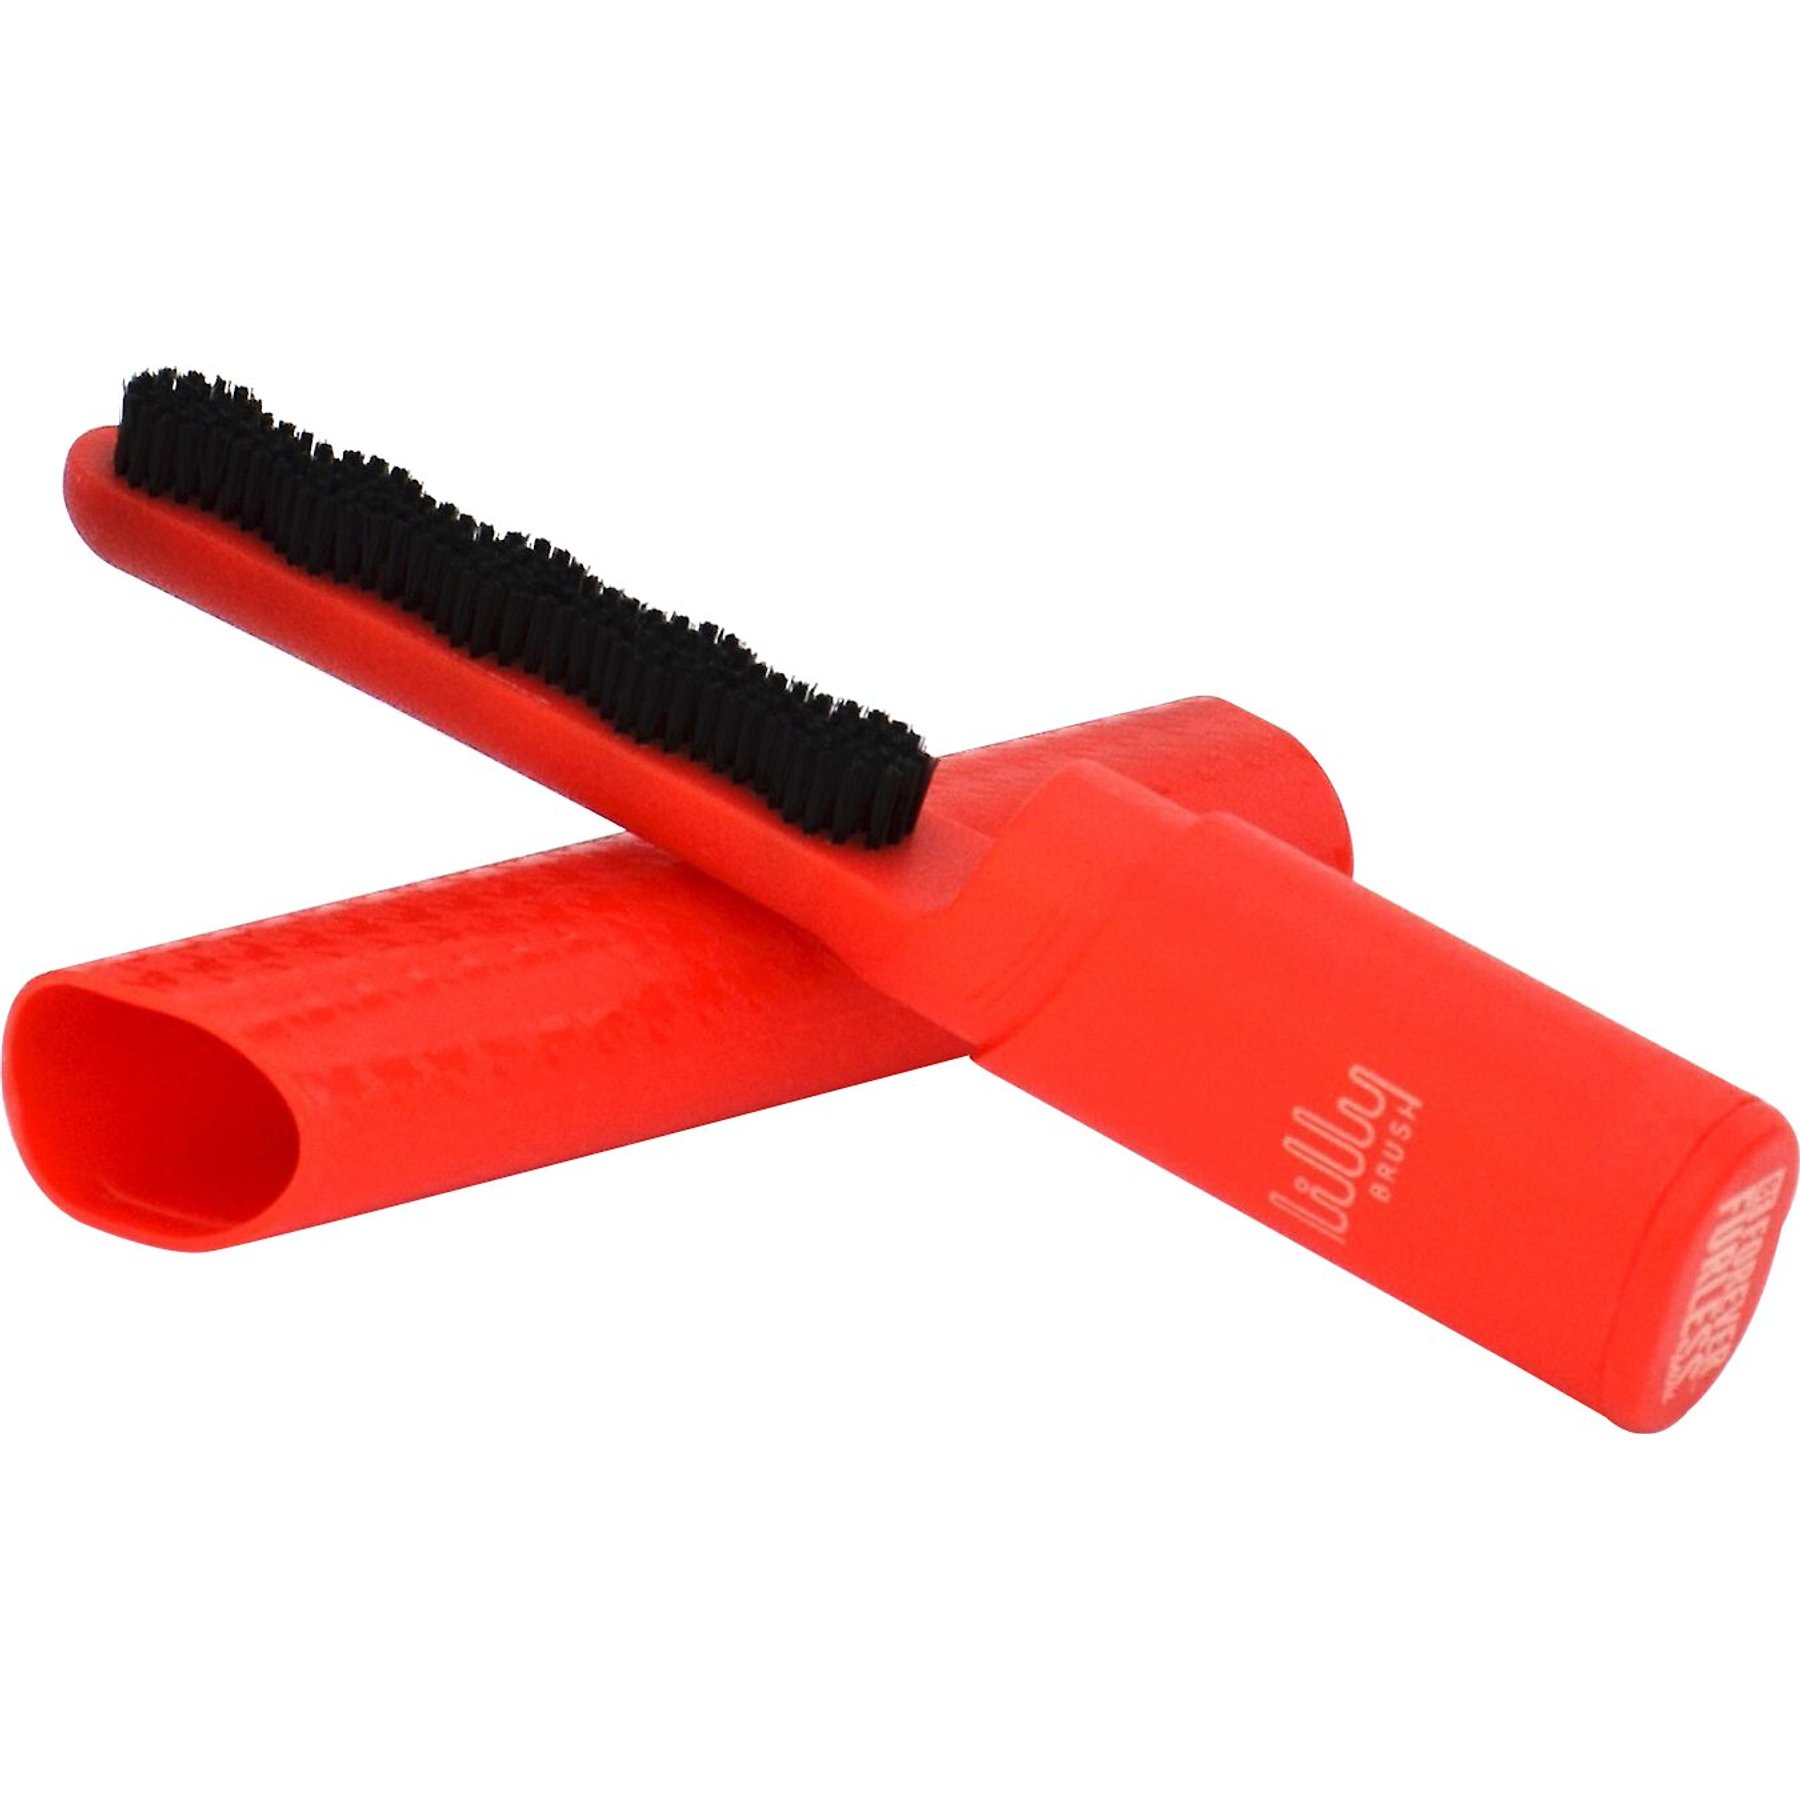 Be Forever Furless with the Lilly Brush Pet Hair Remover